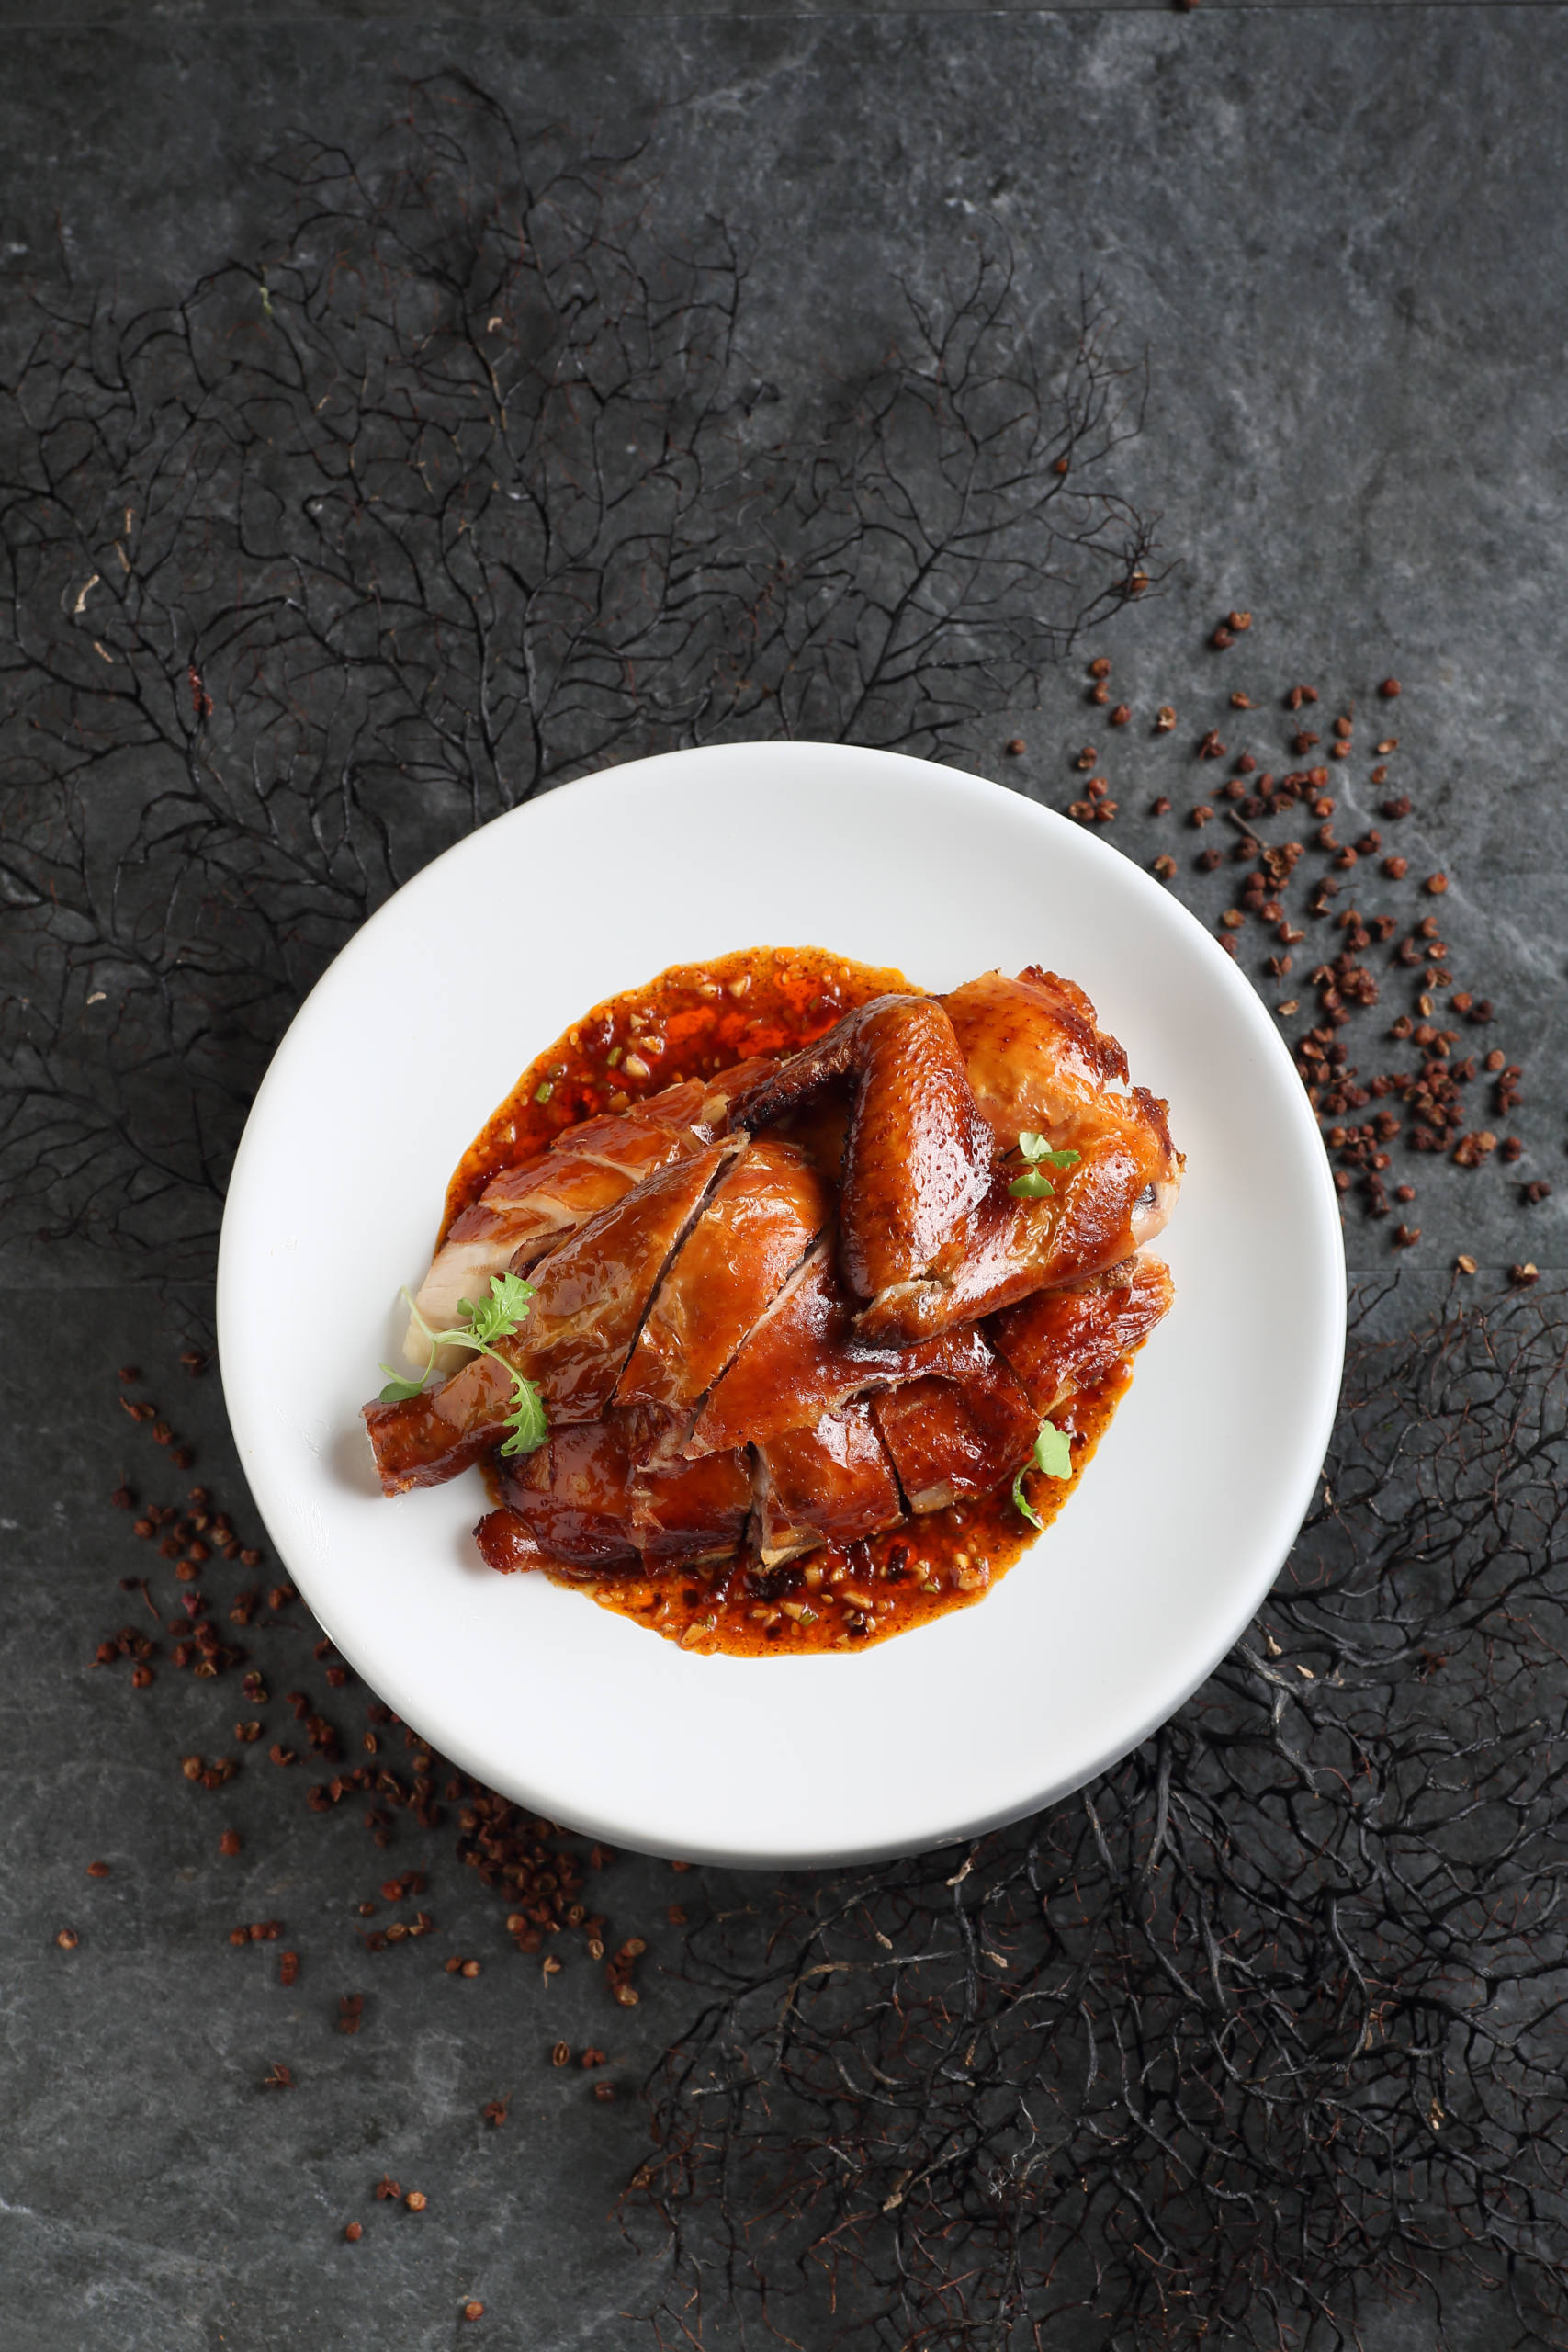 Crystal Jade Jiang Nan Mala Crispy Roasted Chicken, delivered islandwide in Singapore powered by Oddle.